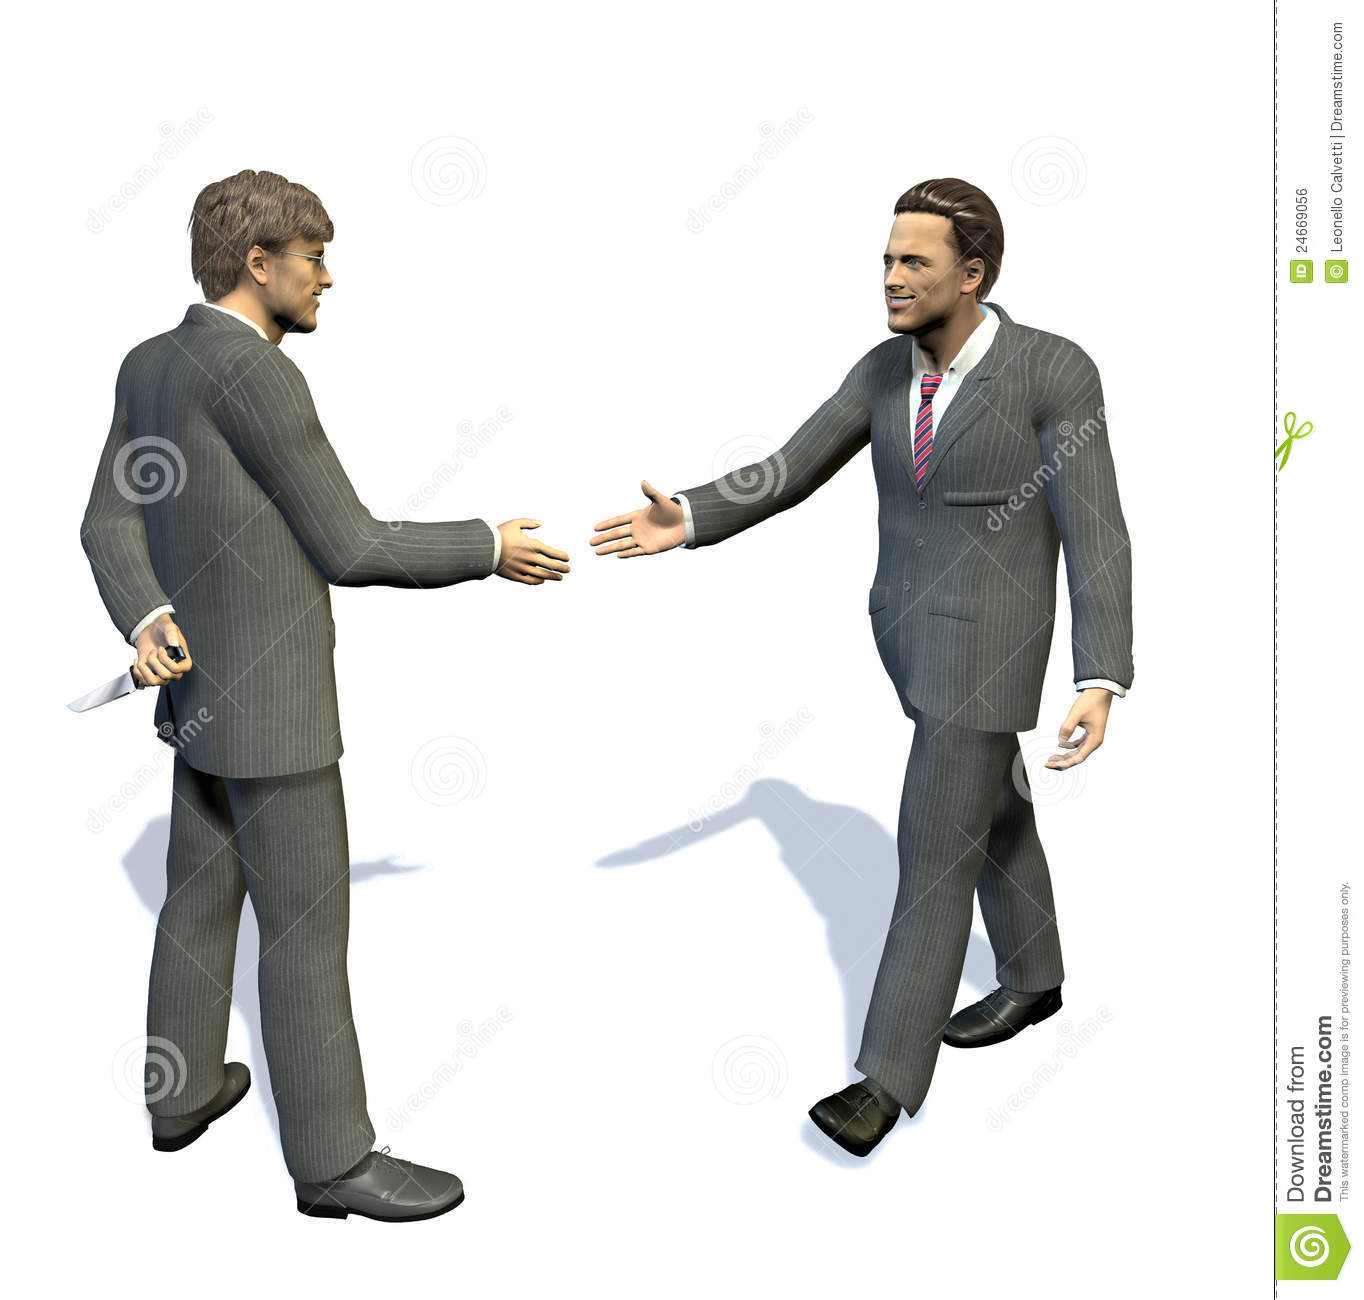 Two Men Going To Shake Their Hands One Of Them Is Hiding A Long Knife